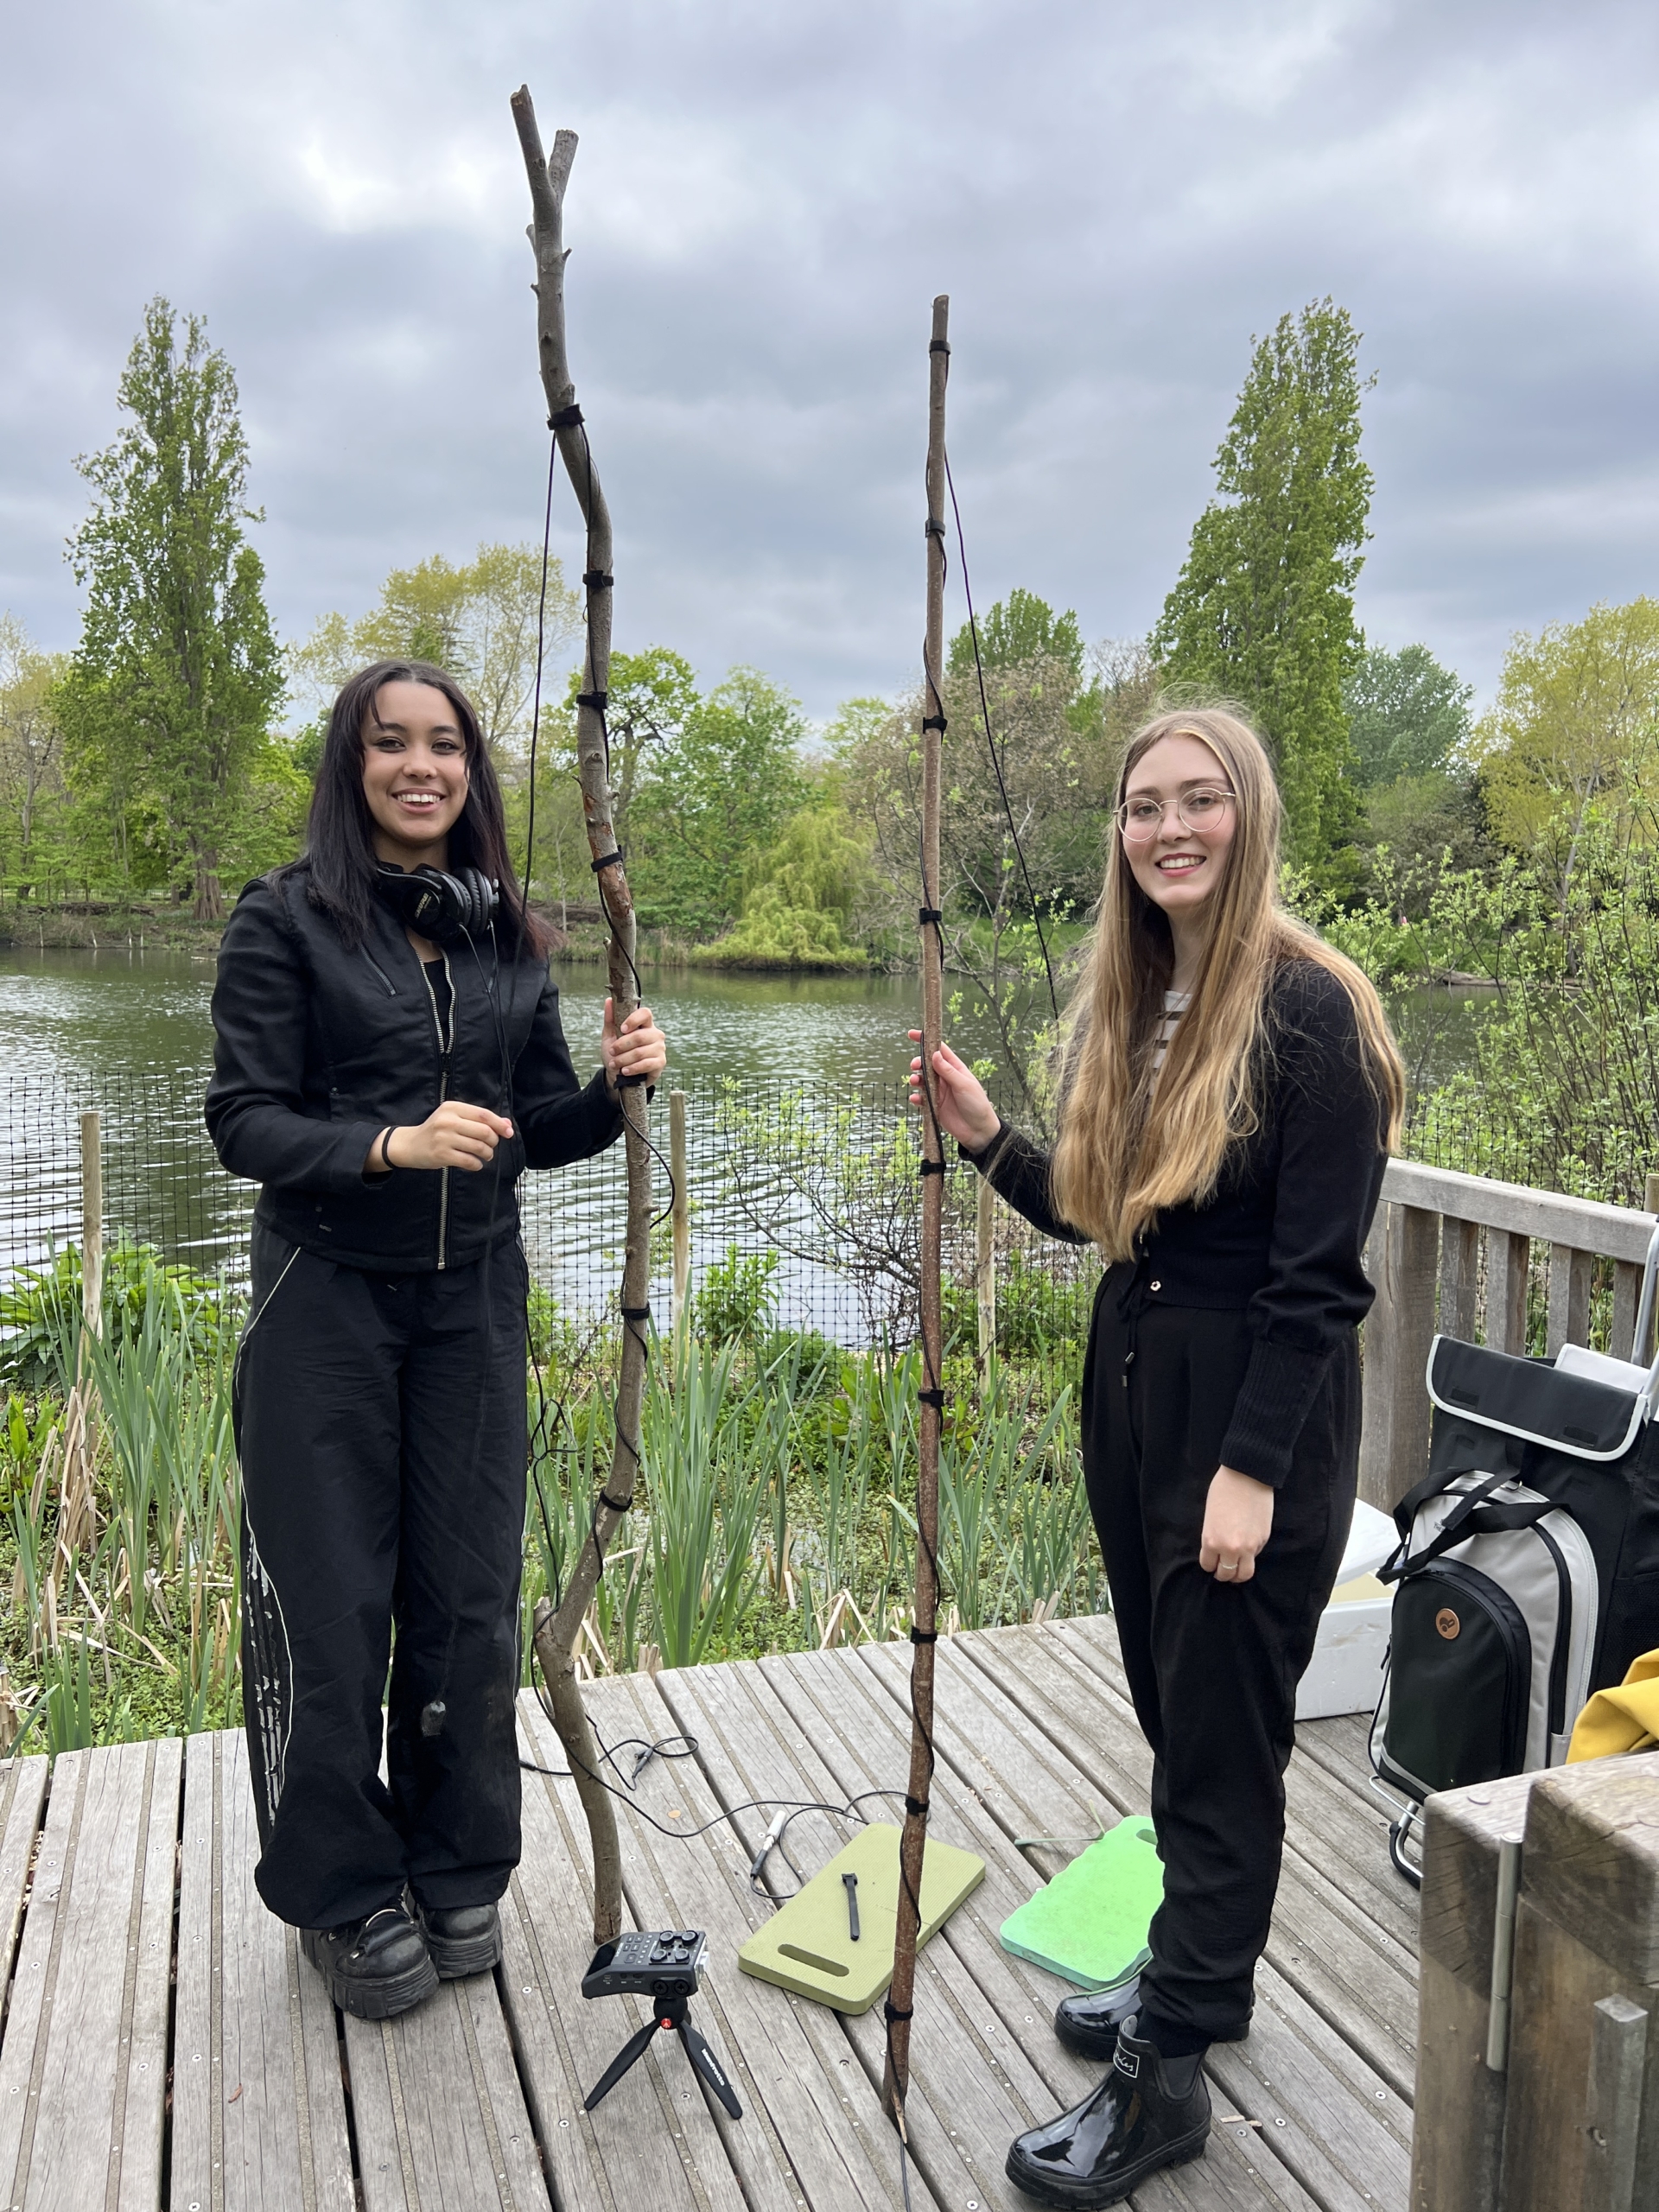 Sounds of the Subaquatic in The Royal Parks, London, led by sound artist Emily Peasgood, 2023. Guildhall School of Music and Drama students Tilley Gartan and Isabel Woodings are standing on a wooden platform on The Long Water in Kensington Gardens. They each hold a long birch branch with a hydrophone wrapped around it and are smiling at the camera.